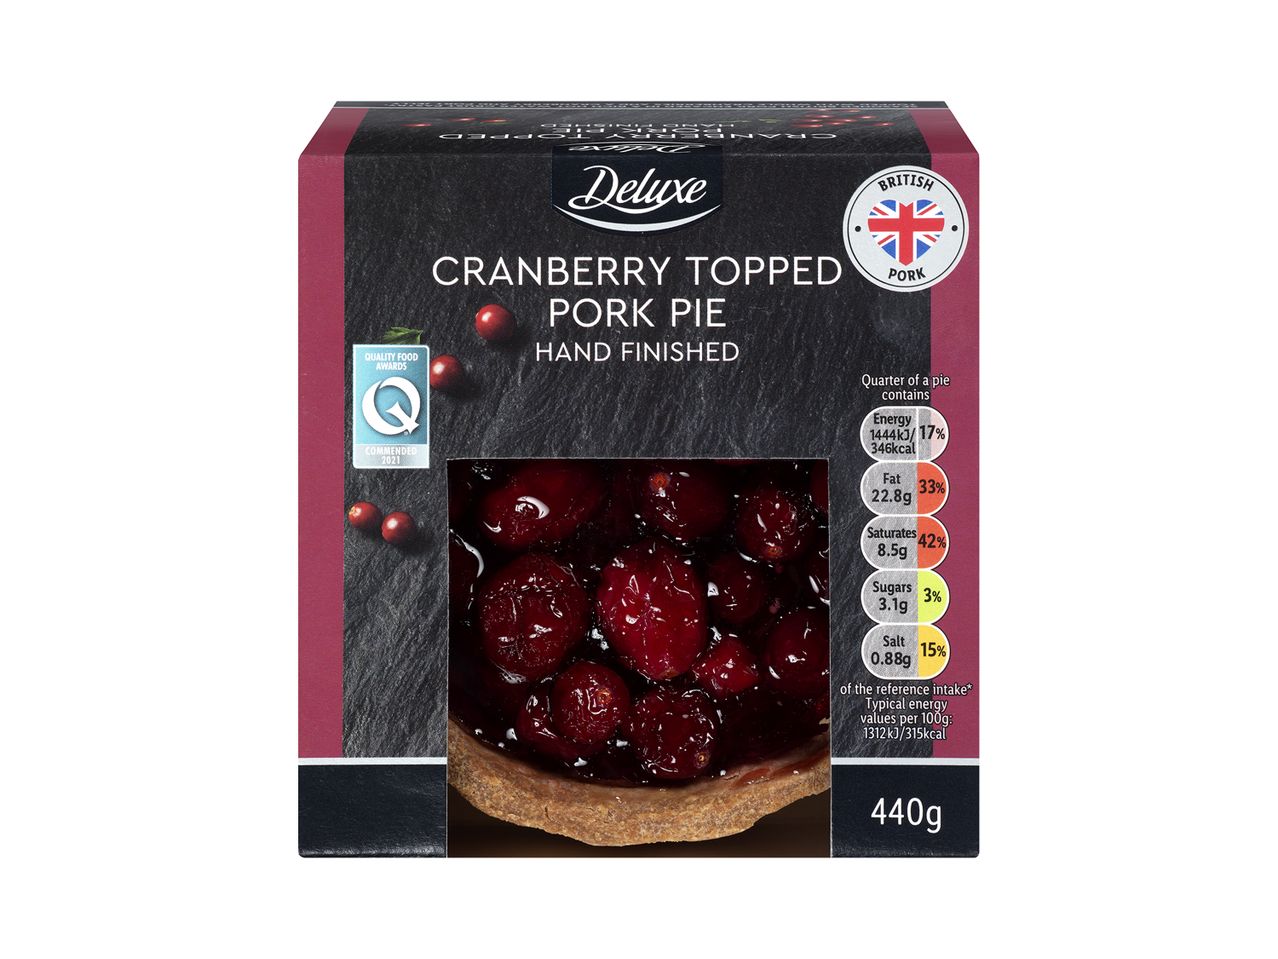 Go to full screen view: Deluxe Cranberry Topped Pork Pie - Image 1